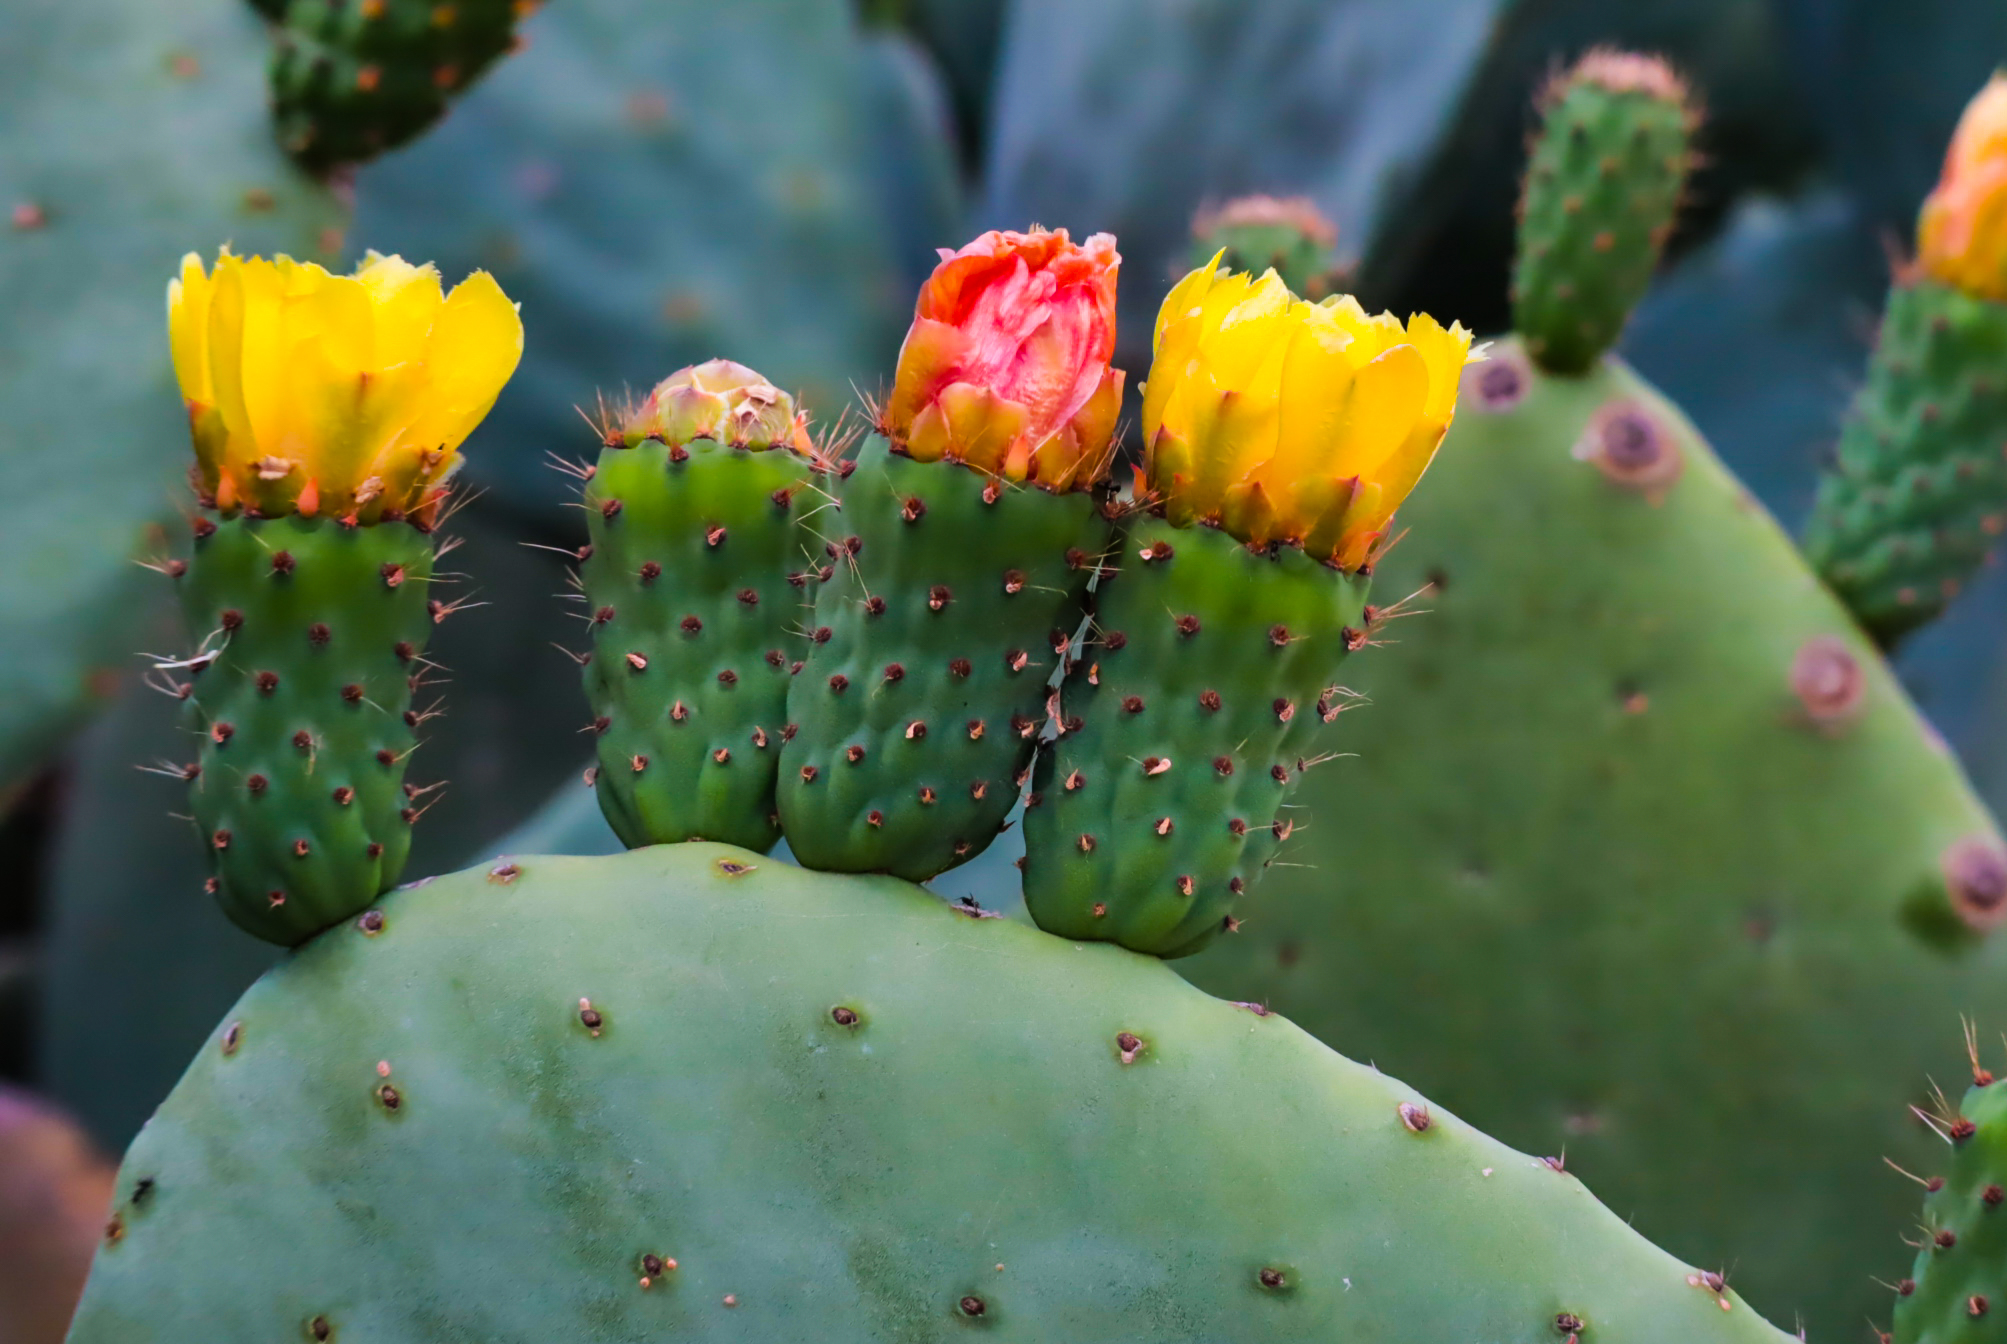 Blossomed prickly pears...